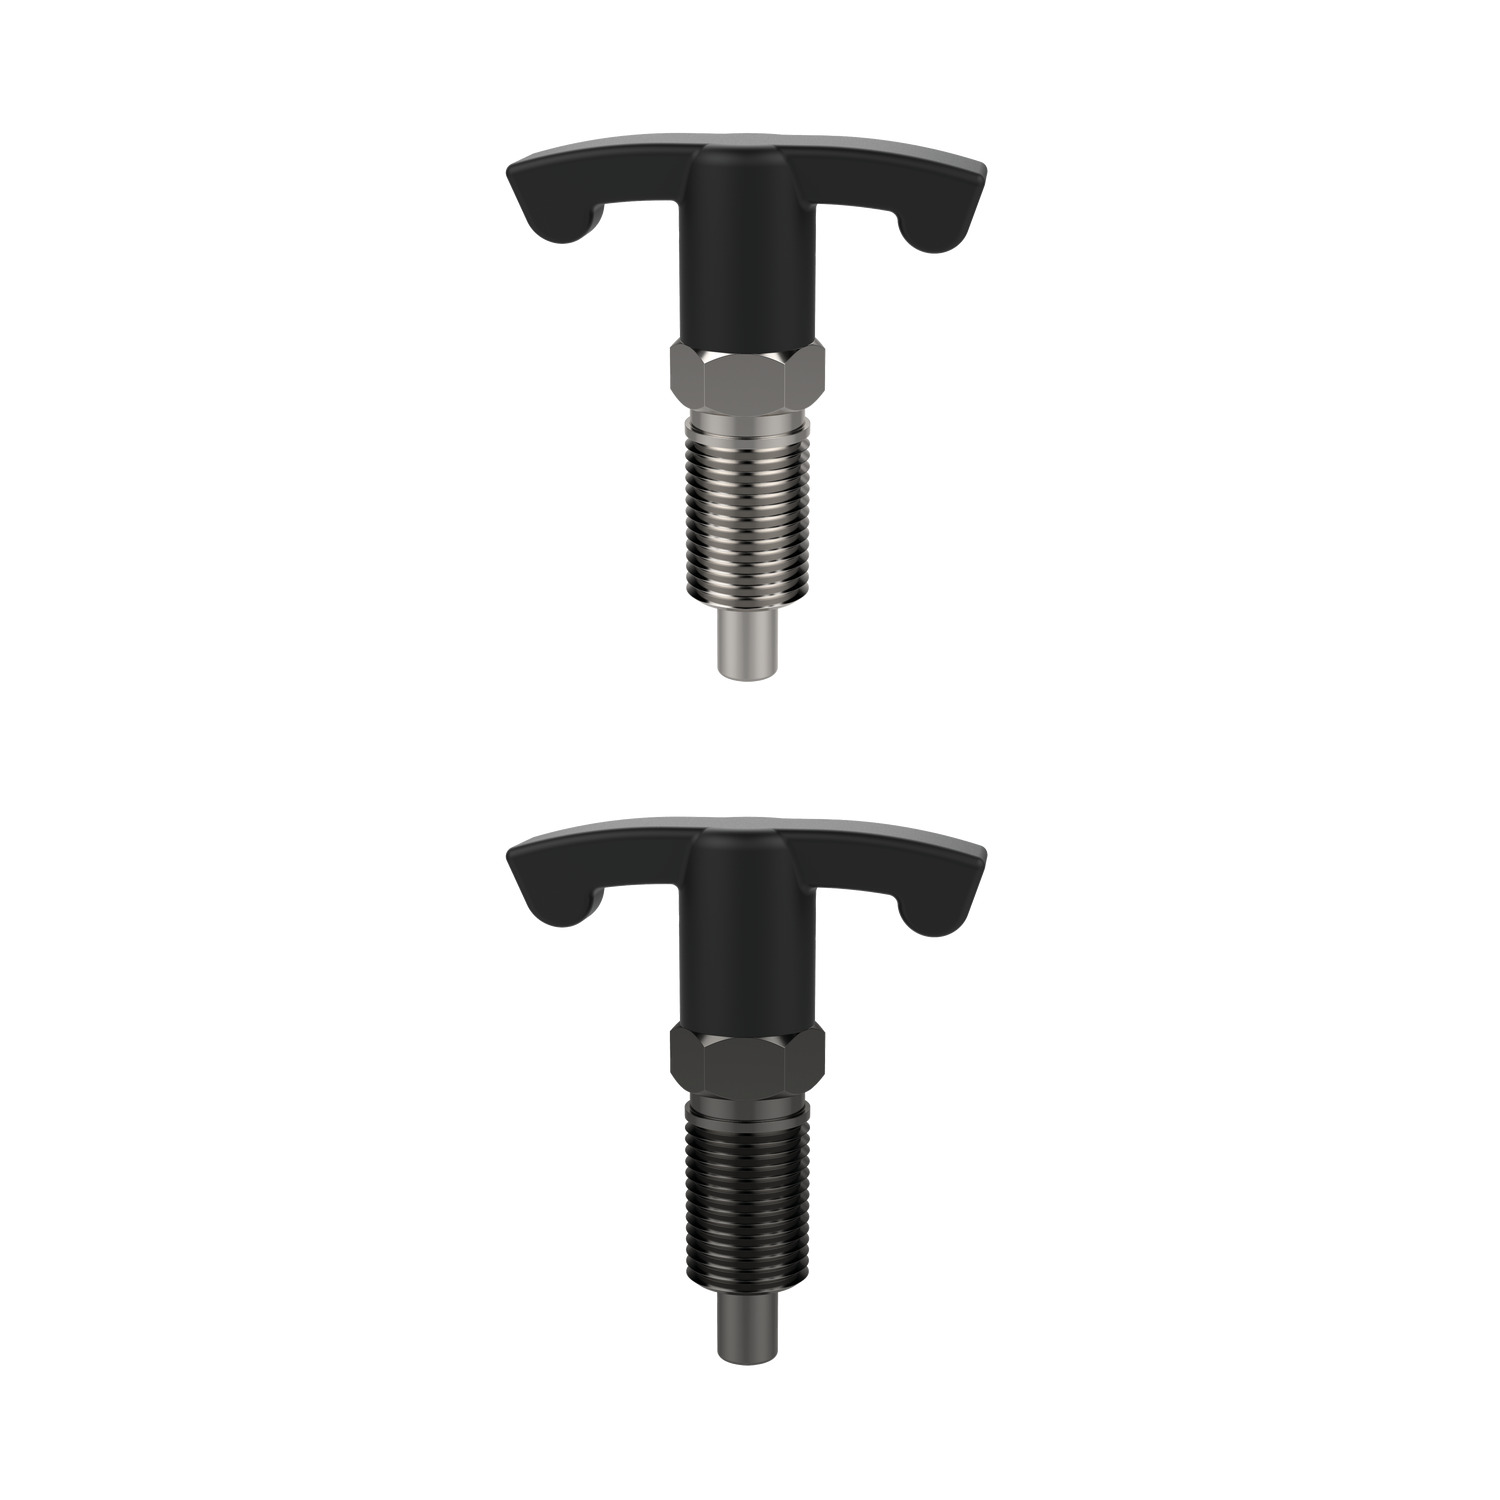 Index Plungers - T-handle Grip T-handle grip index plunger, locking, compact. Easy to grip handle helps improved handling when using safety gloves or other situations when an operator has limited dexterity.